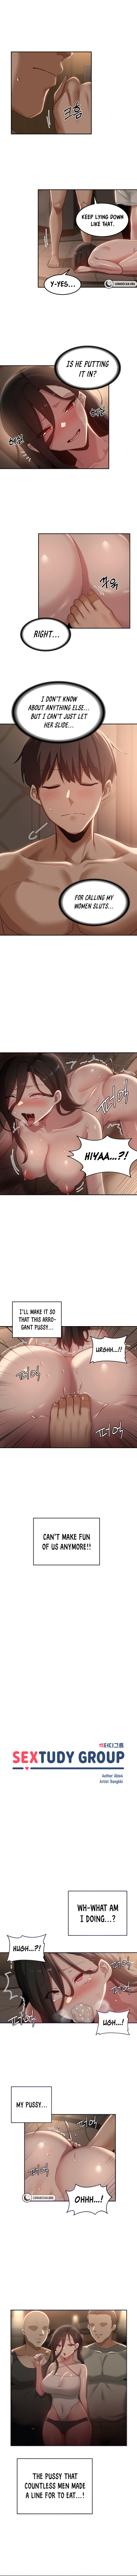 Panel Image 1 for chapter 98 of manhwa Sex Study Group on read.oppai.stream